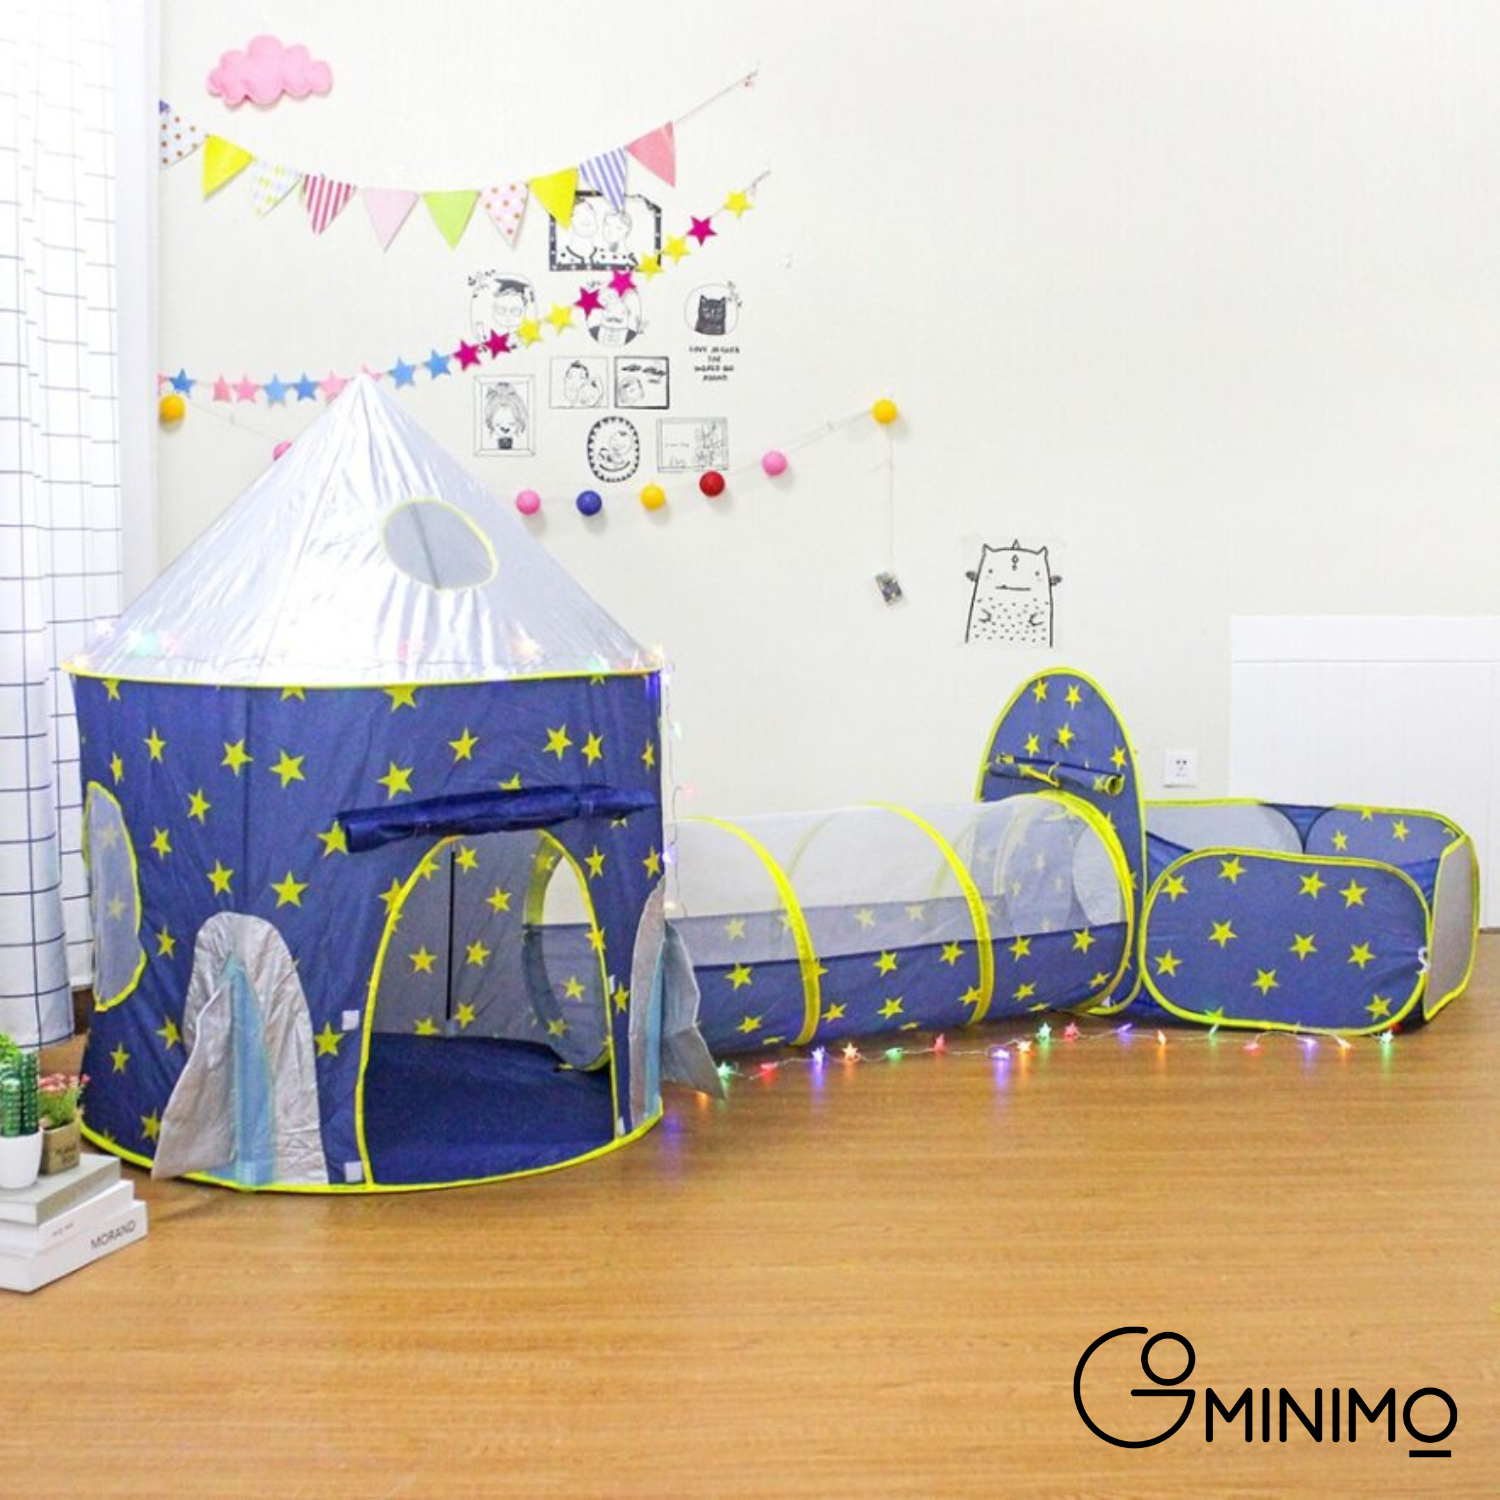 GOMINIMO 3 in 1 Sky Style Kids Play Tent with Carrying Bag (Blue and Yellow)